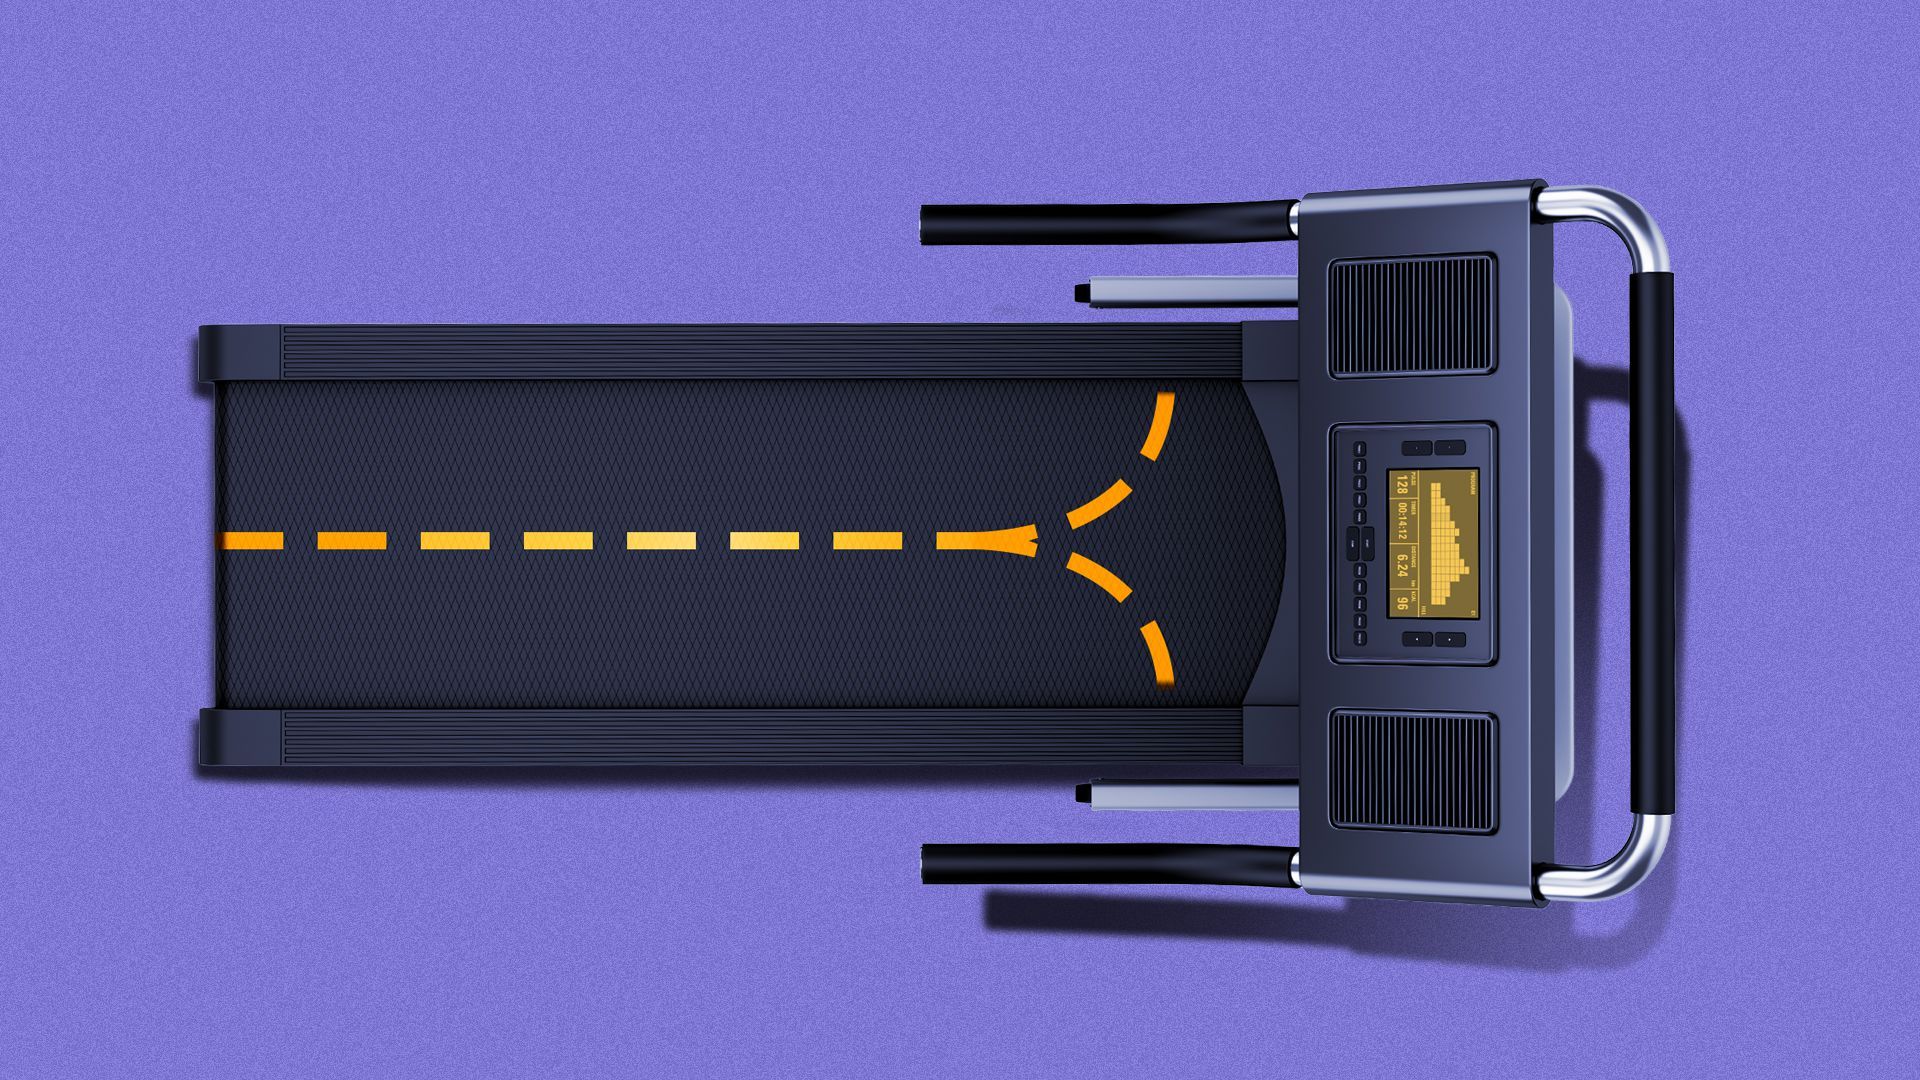 Illustration of a Conveyor Belt with a Forked Yellow Road Line in the Middle